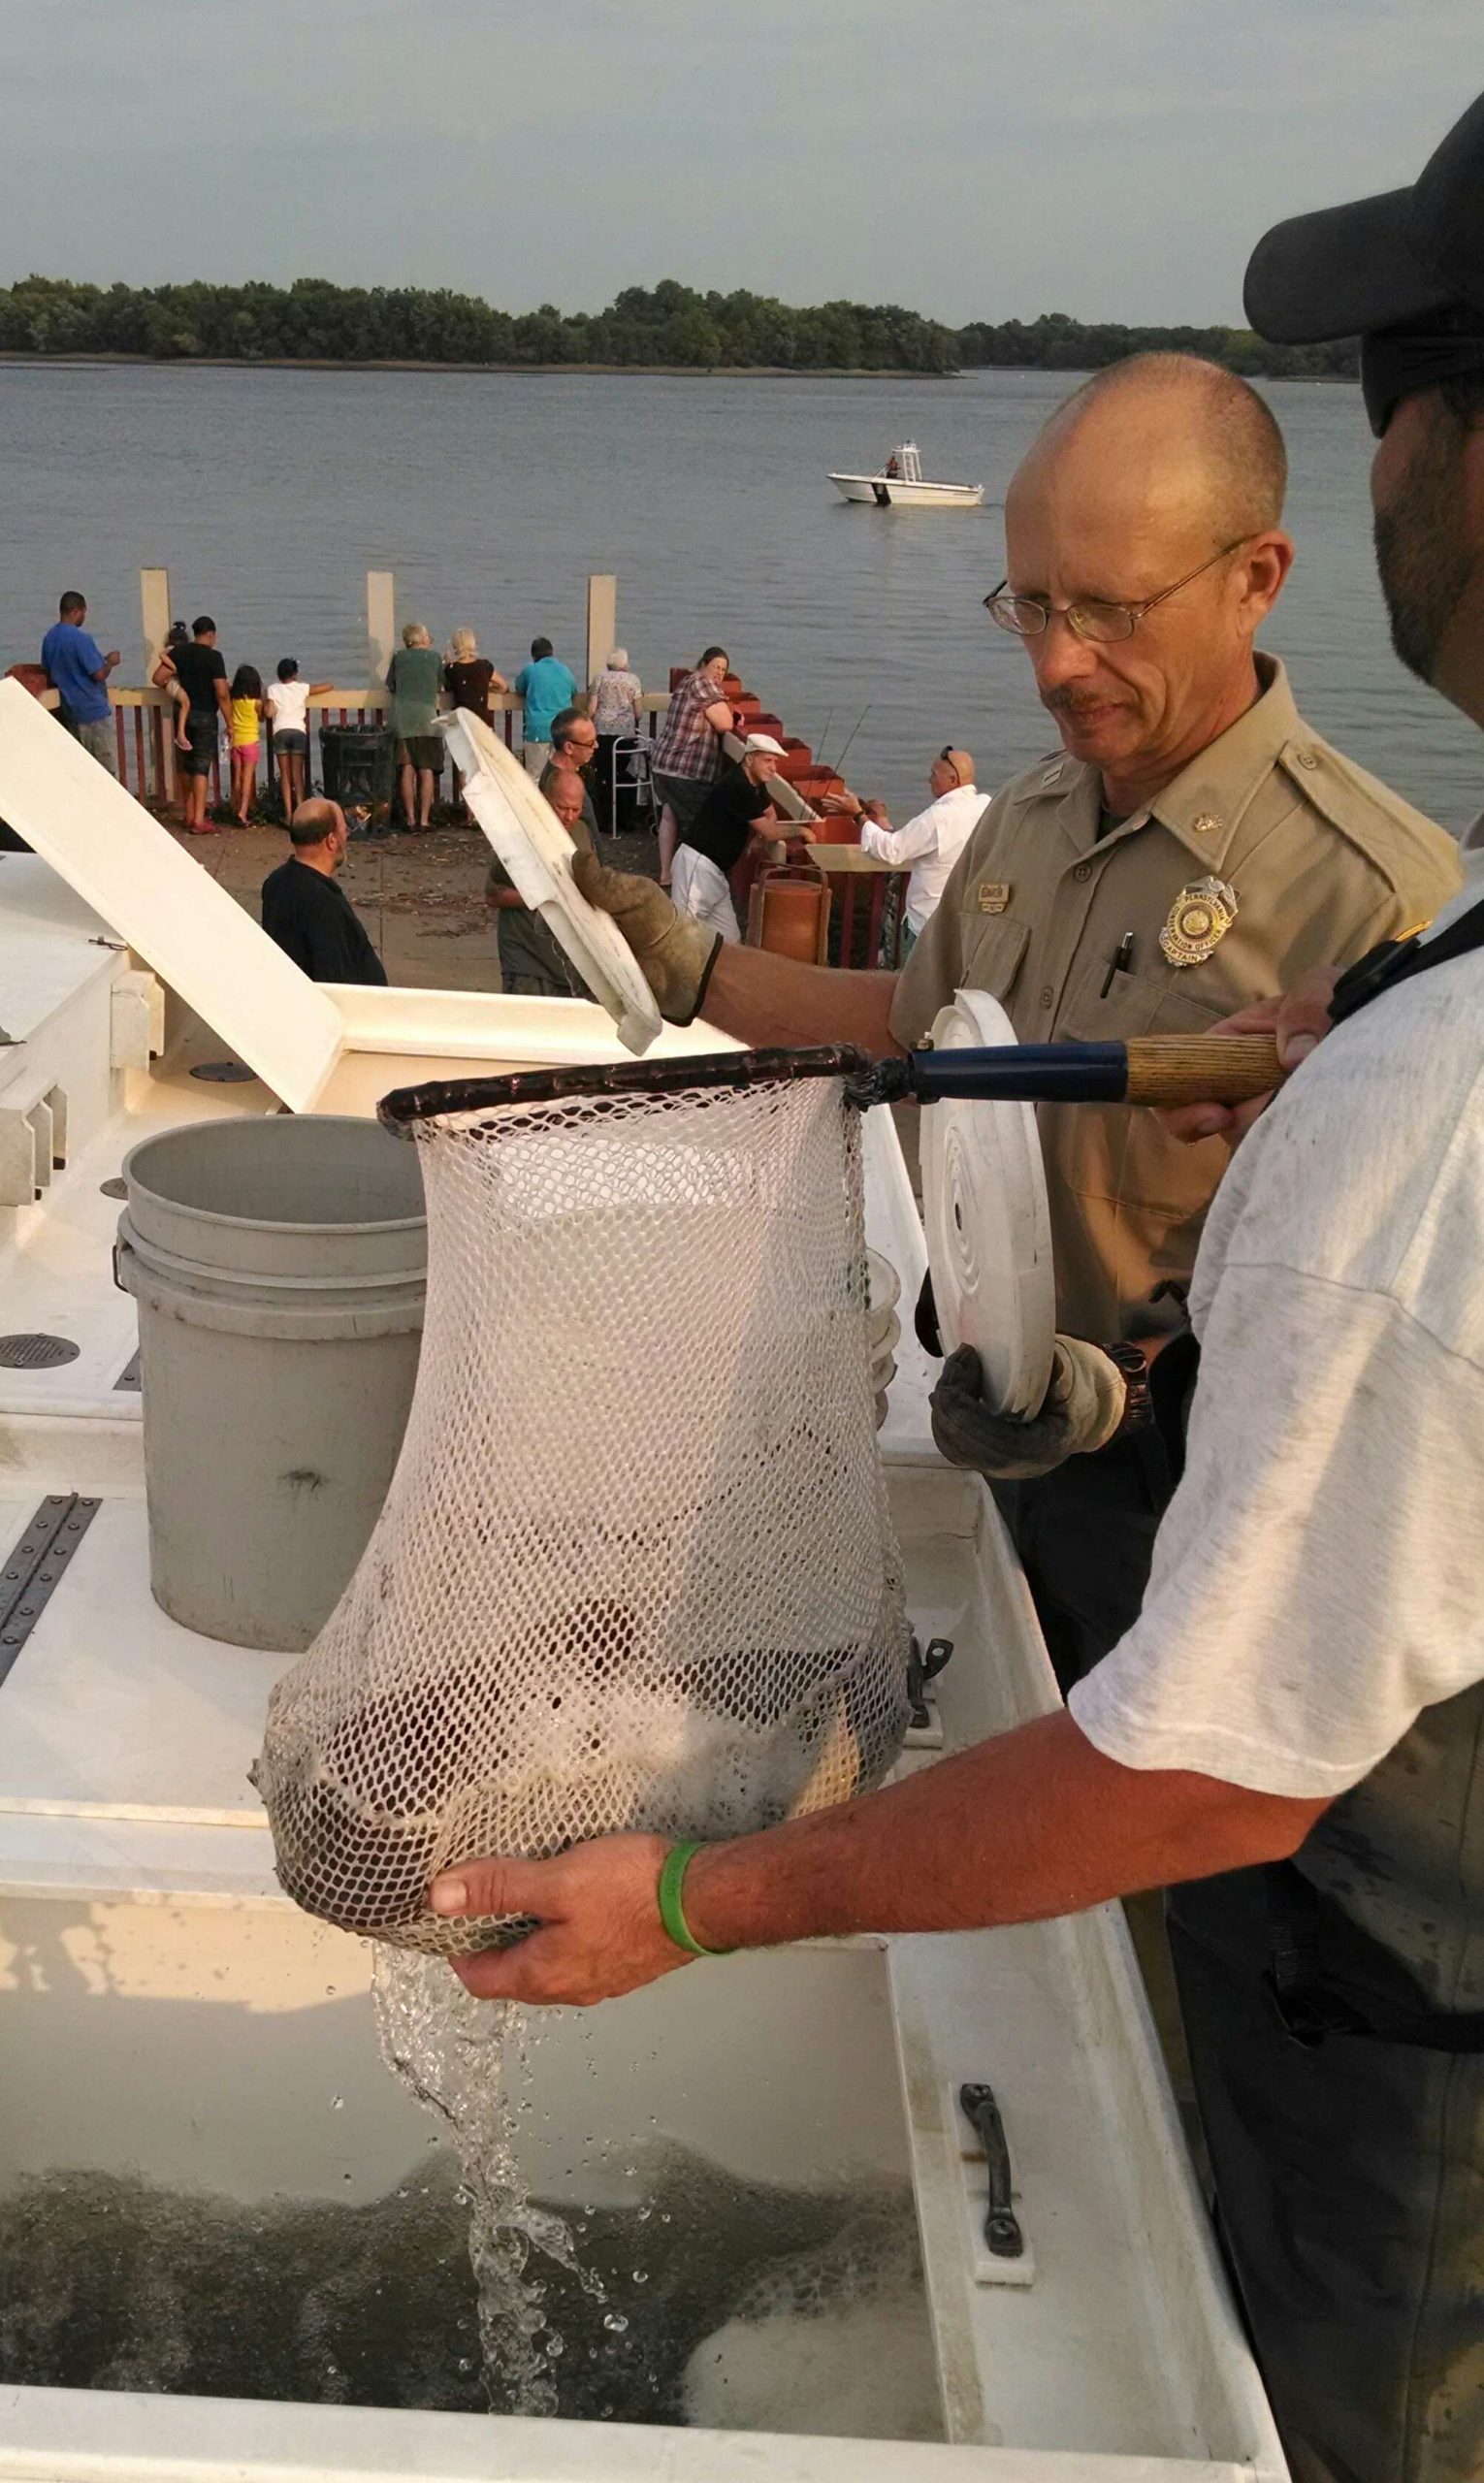 There was no other option for us at that point than to dip the fish out of the truck's tanks, put them in buckets and nets, and hand-carry them to the water. Here, Ray Bednarchik, PAFBC law enforcement captain, and Joe Tusing begin dipping the fish out of the tanks via net.